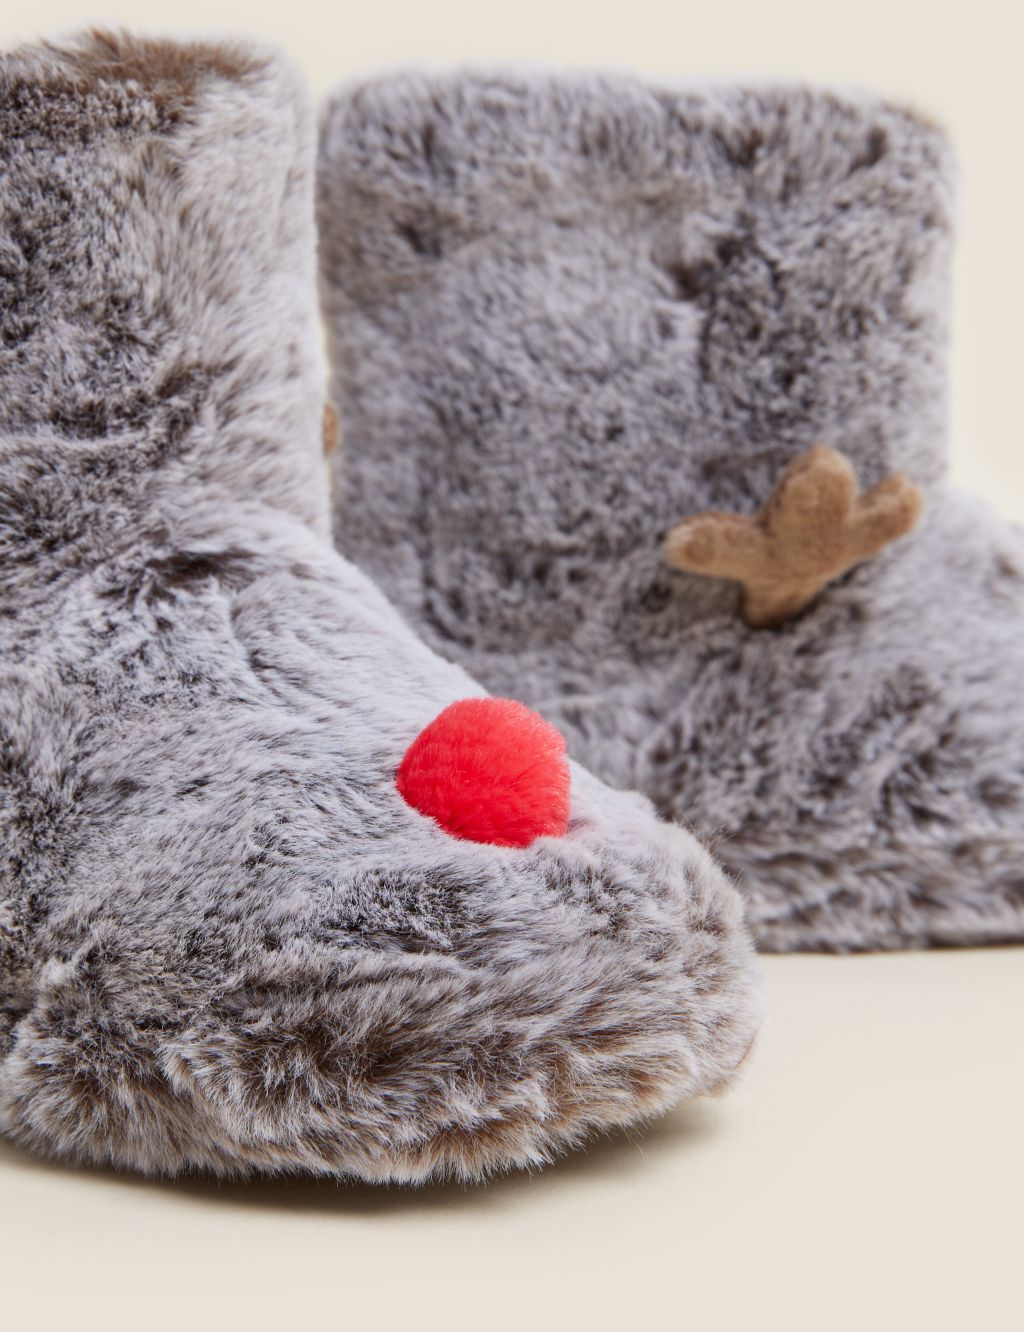 Kids' Reindeer Slipper Boots (4 Small - 6 Large) image 2